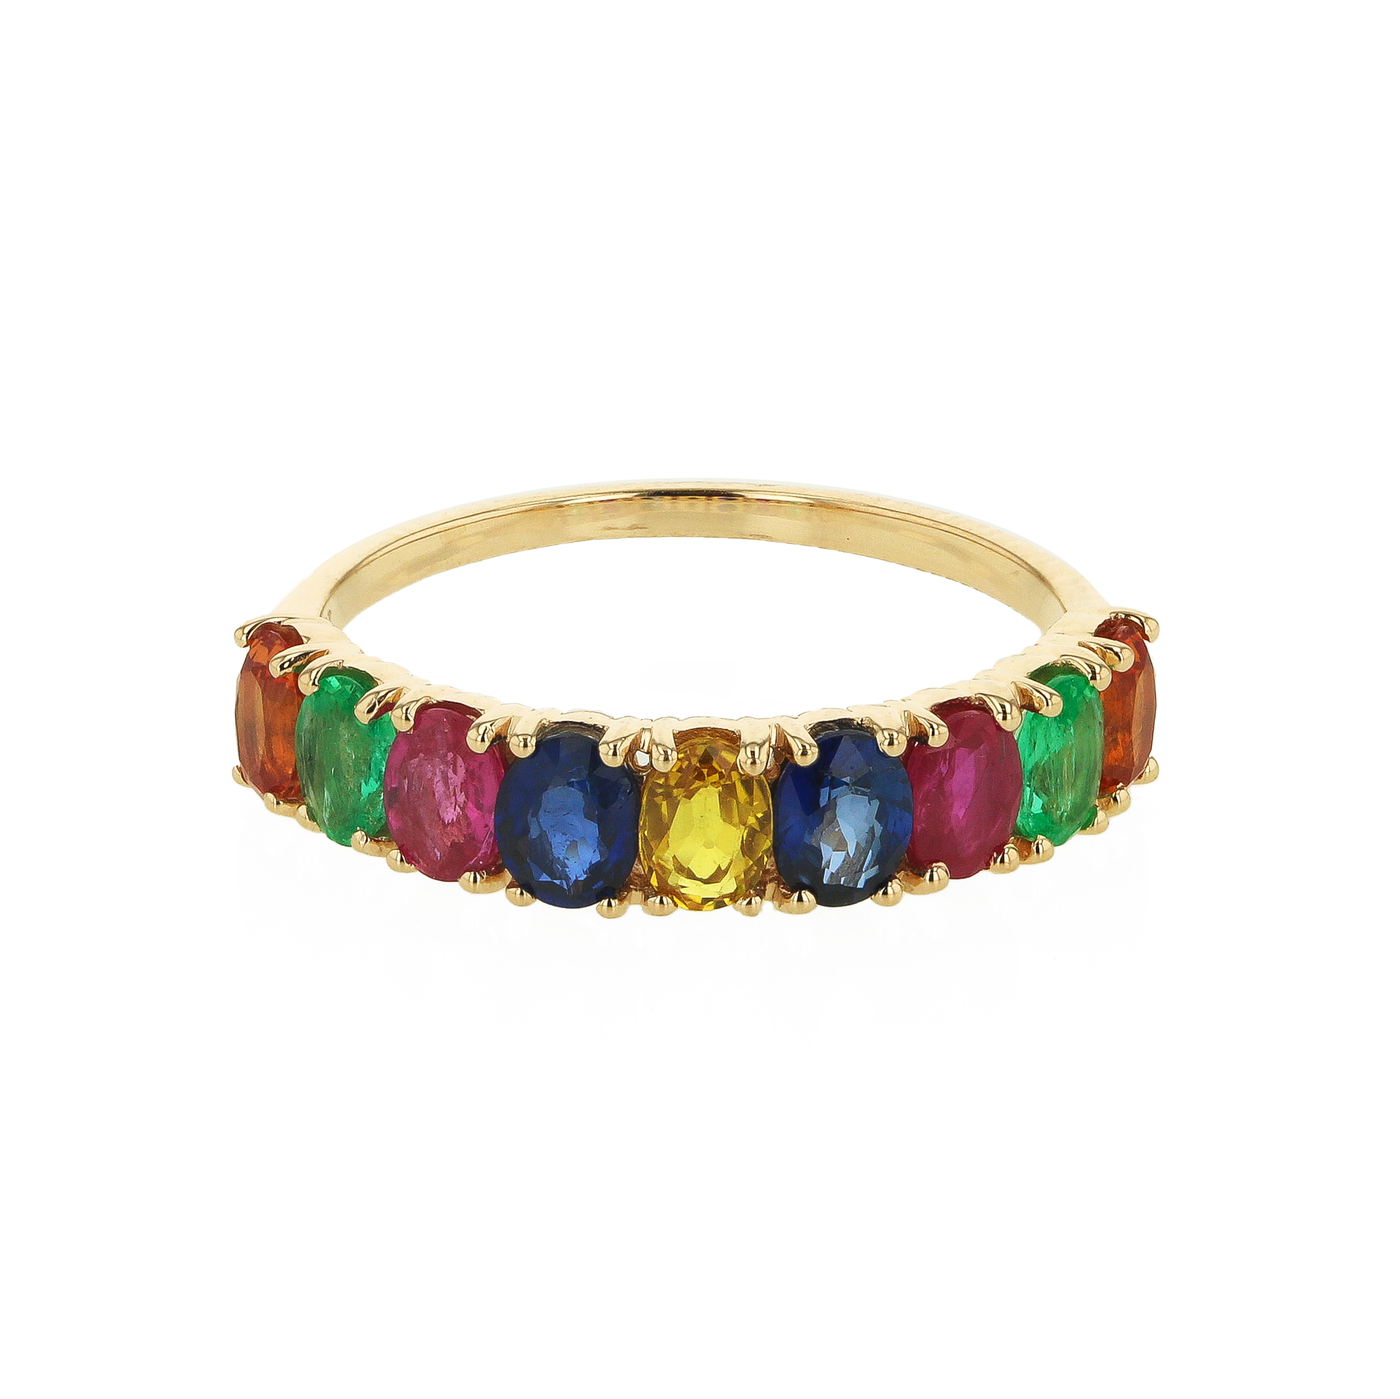 "The Vivian" 1.95 CTW Oval Cut Multi-colored Sapphire Ring